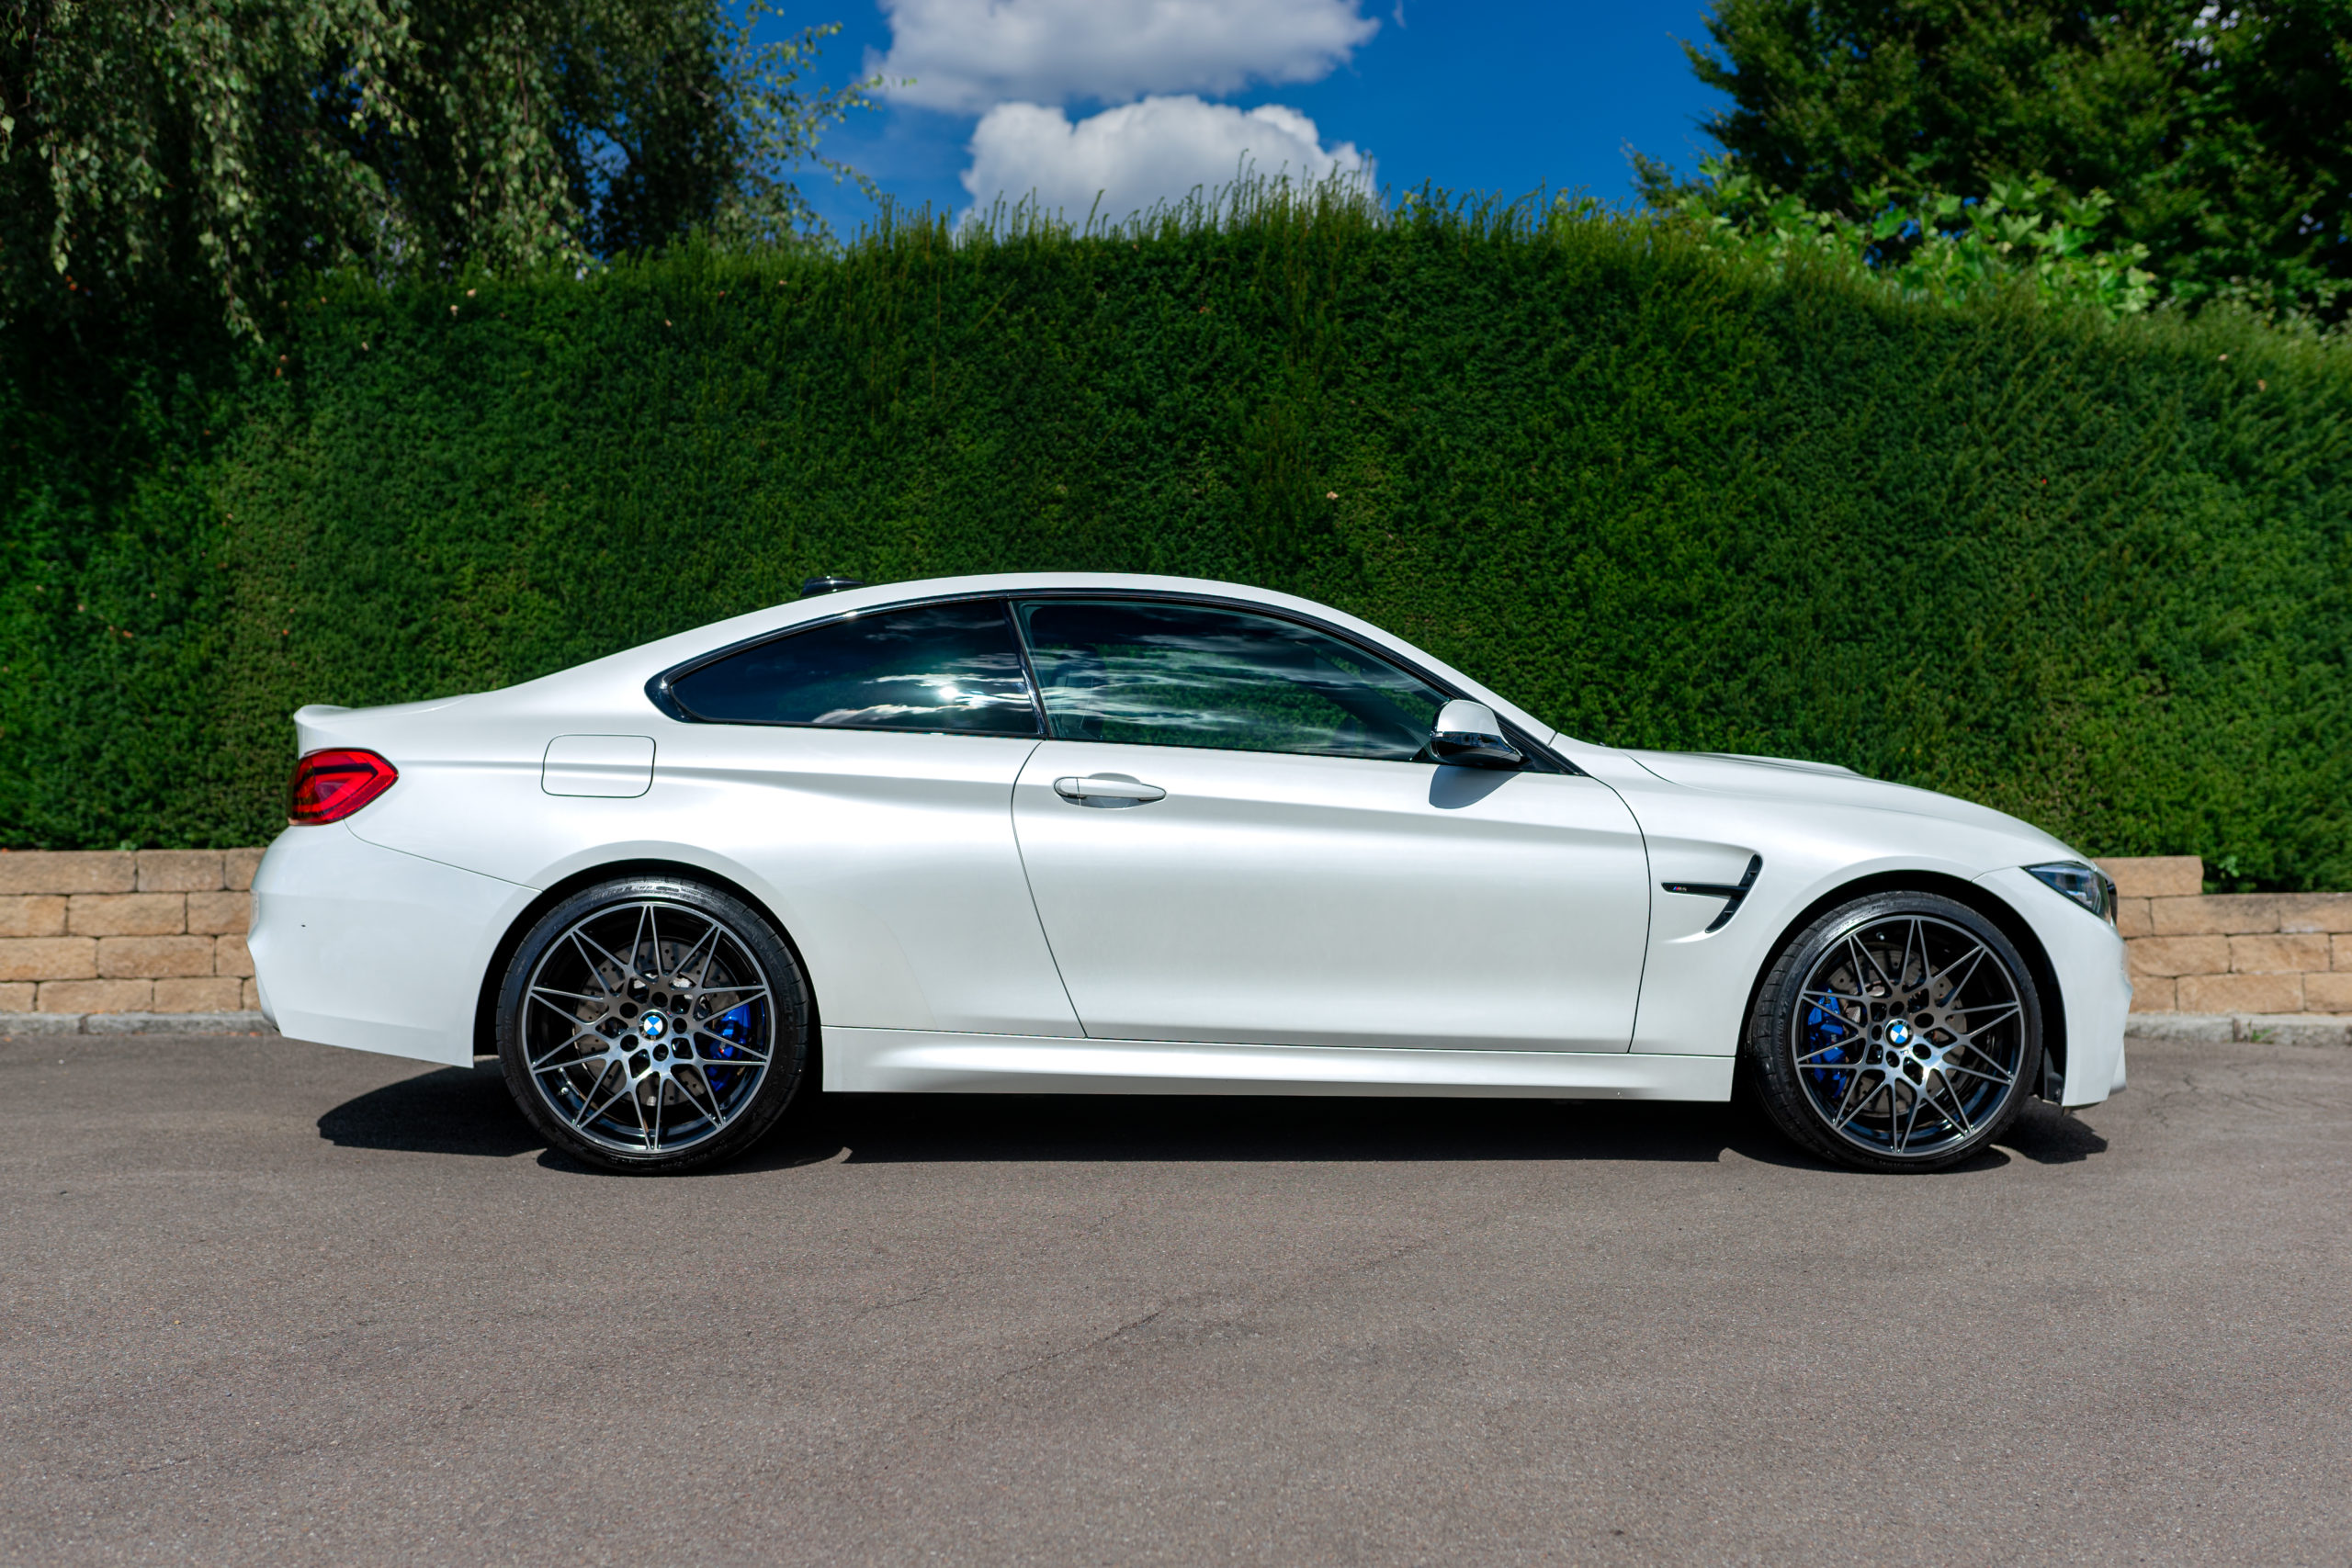 Buy BMW M4 Competition - Röhrle Mobility